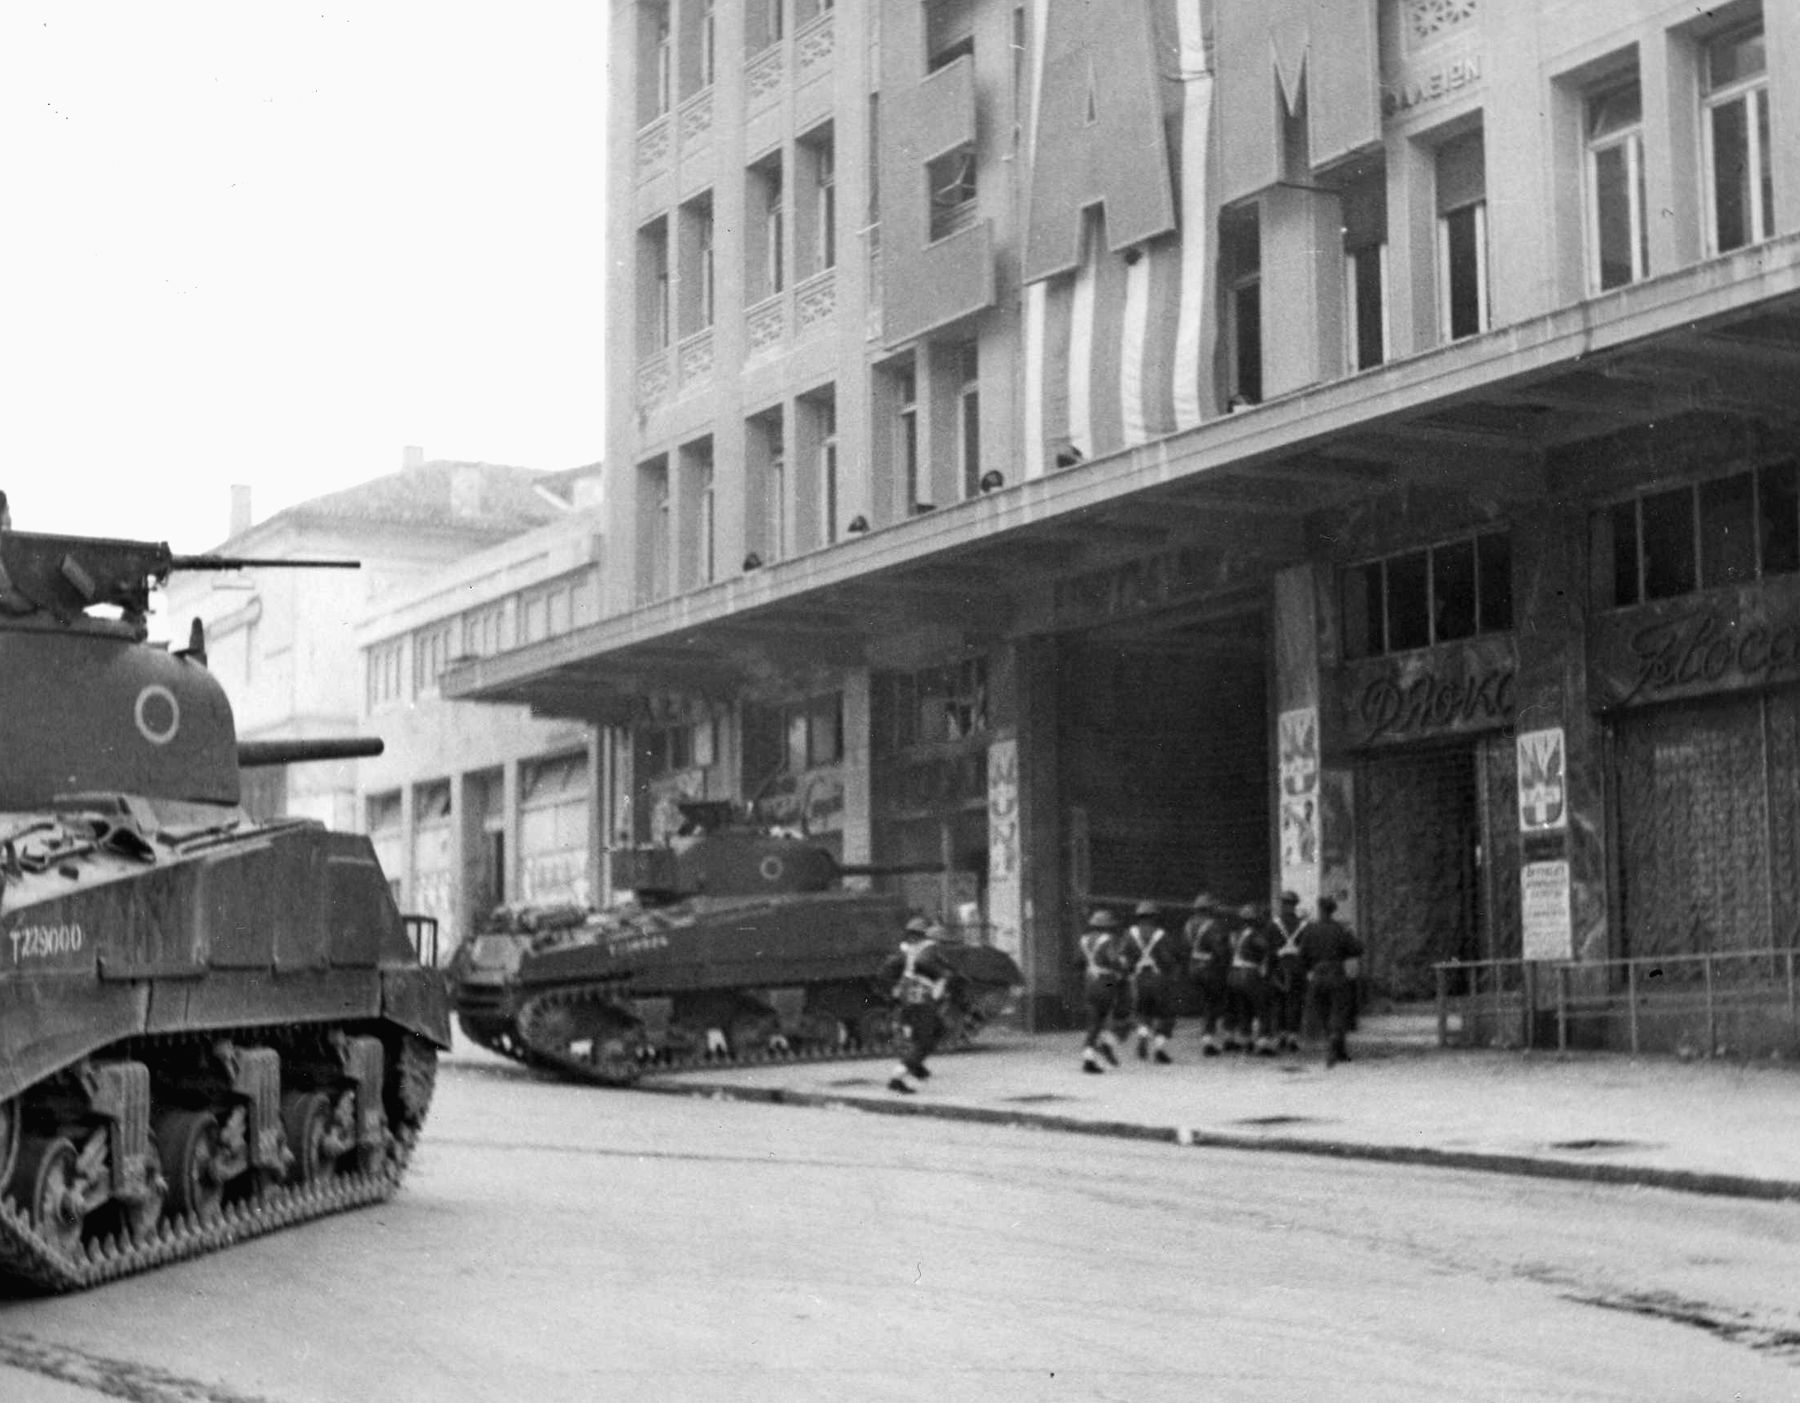  A British tank crashes through the door of the EAM Building in Athens during the effort to crush resistance by the Communist ELAS guerrillas. The Communists put up stiff resistance for several days.